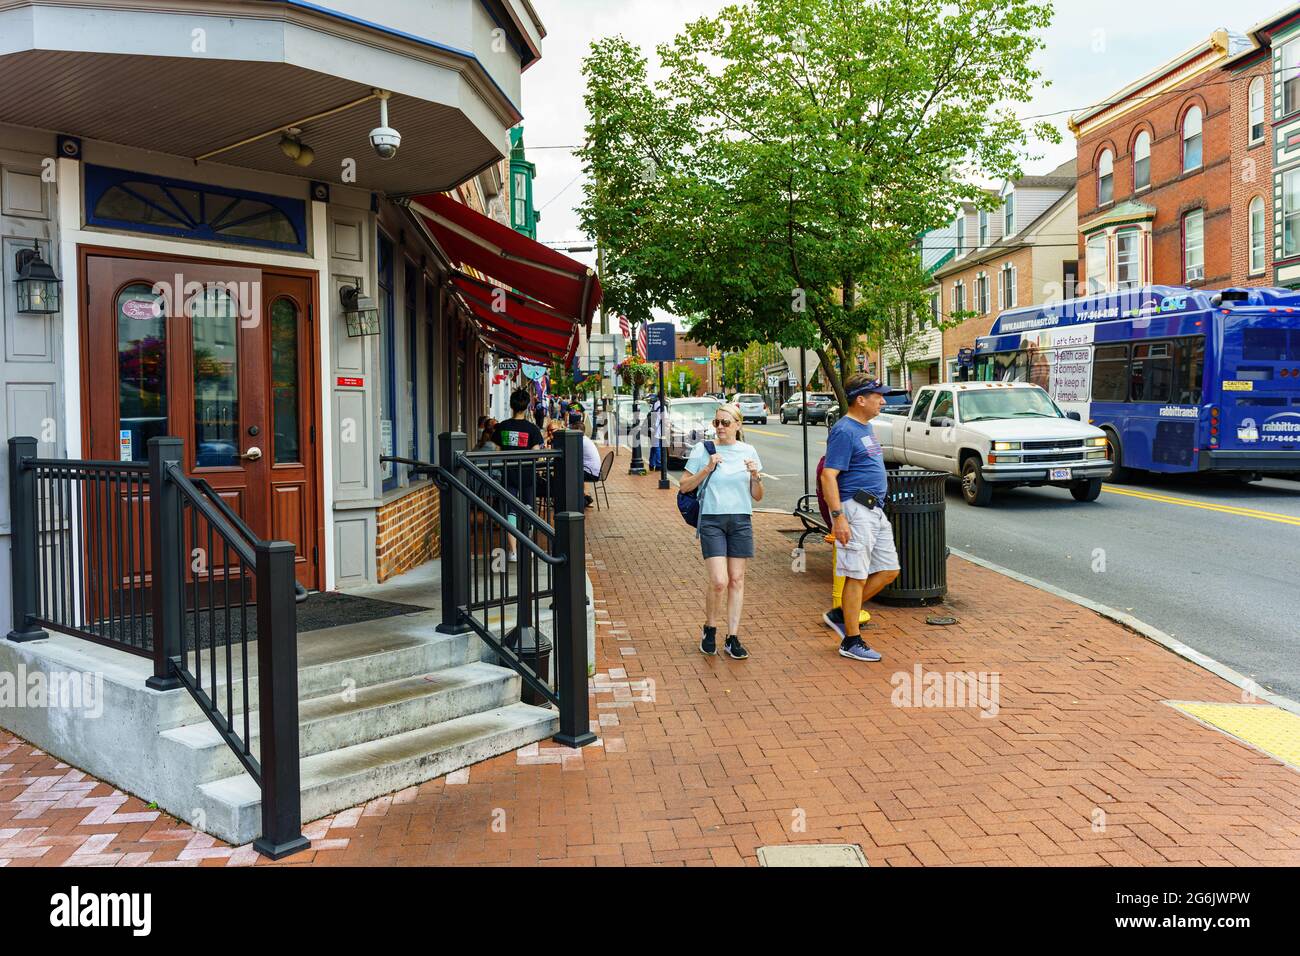 Gettysburg, PA, USA - July 4, 2021: A view of the downtown area in the historic town of Gettysburg with visitors. Stock Photo